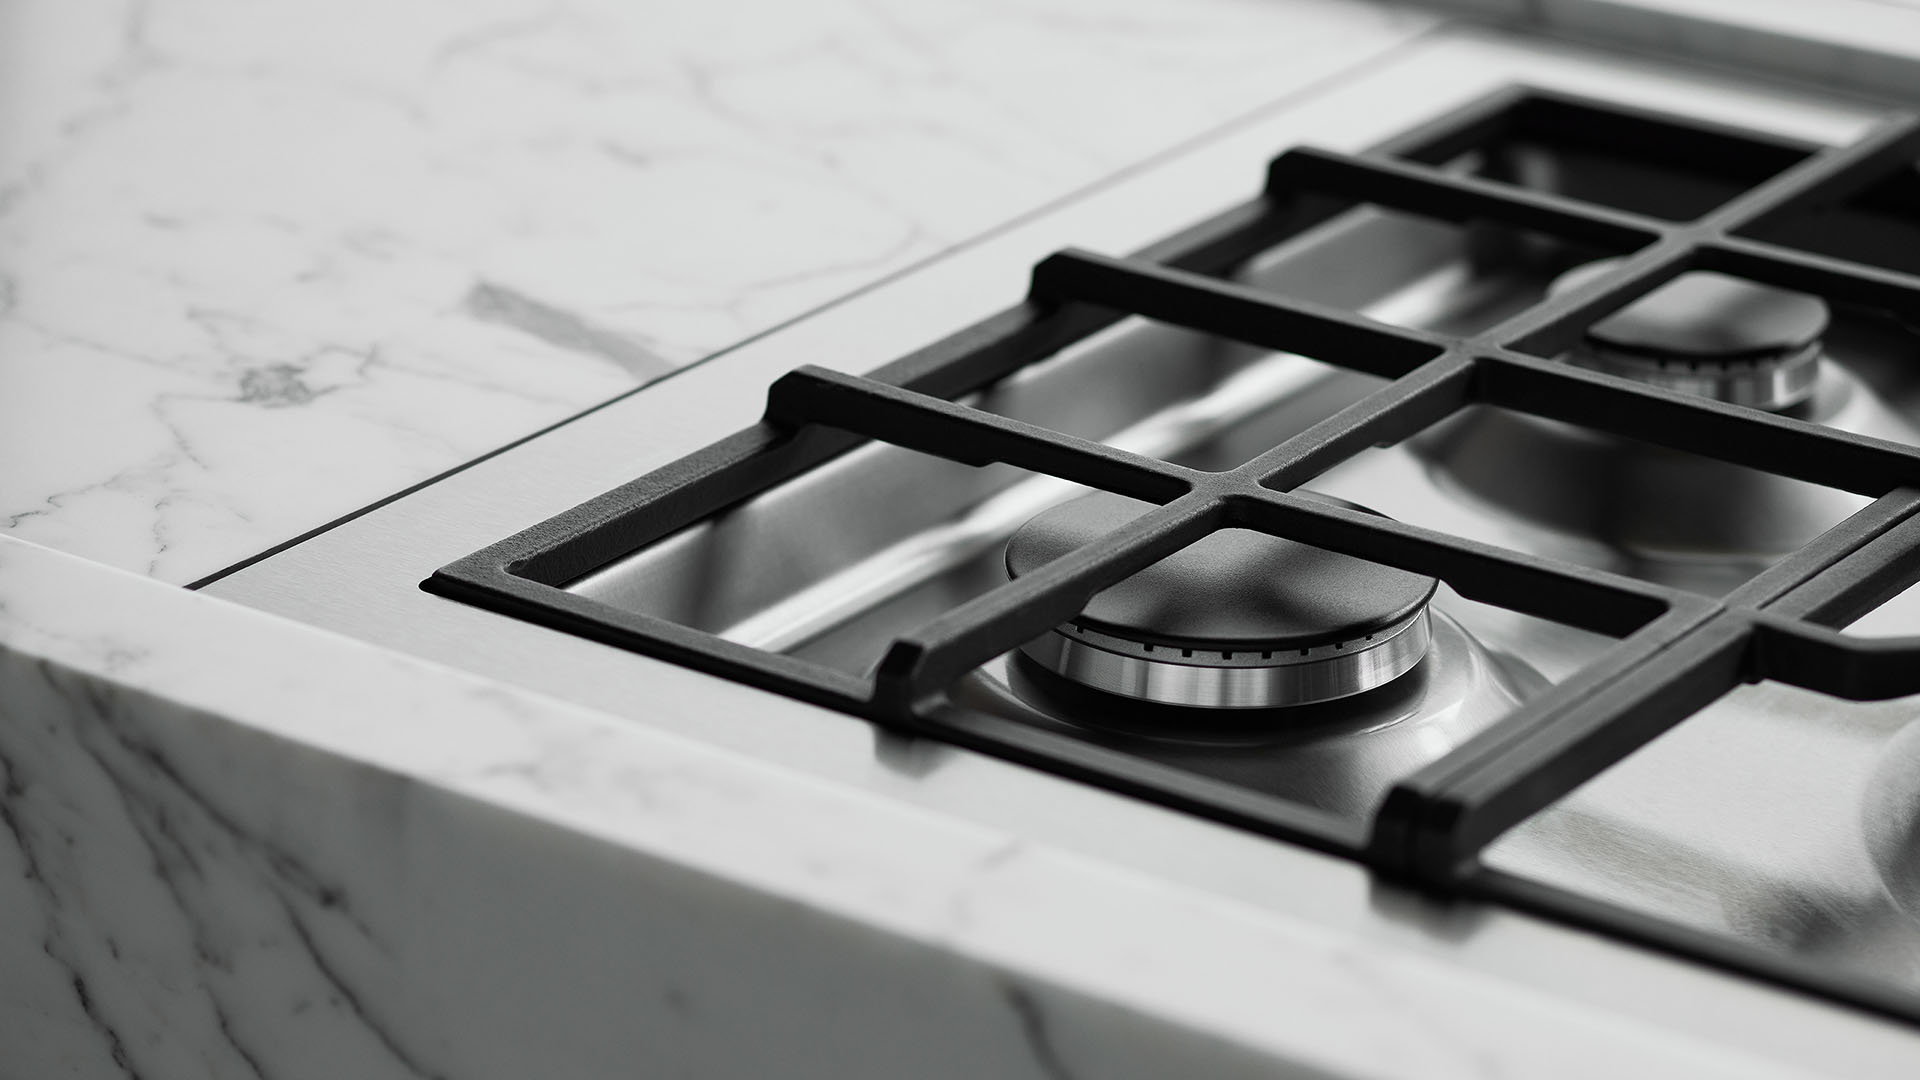 Shot of the Contemporary Gas Cooktop